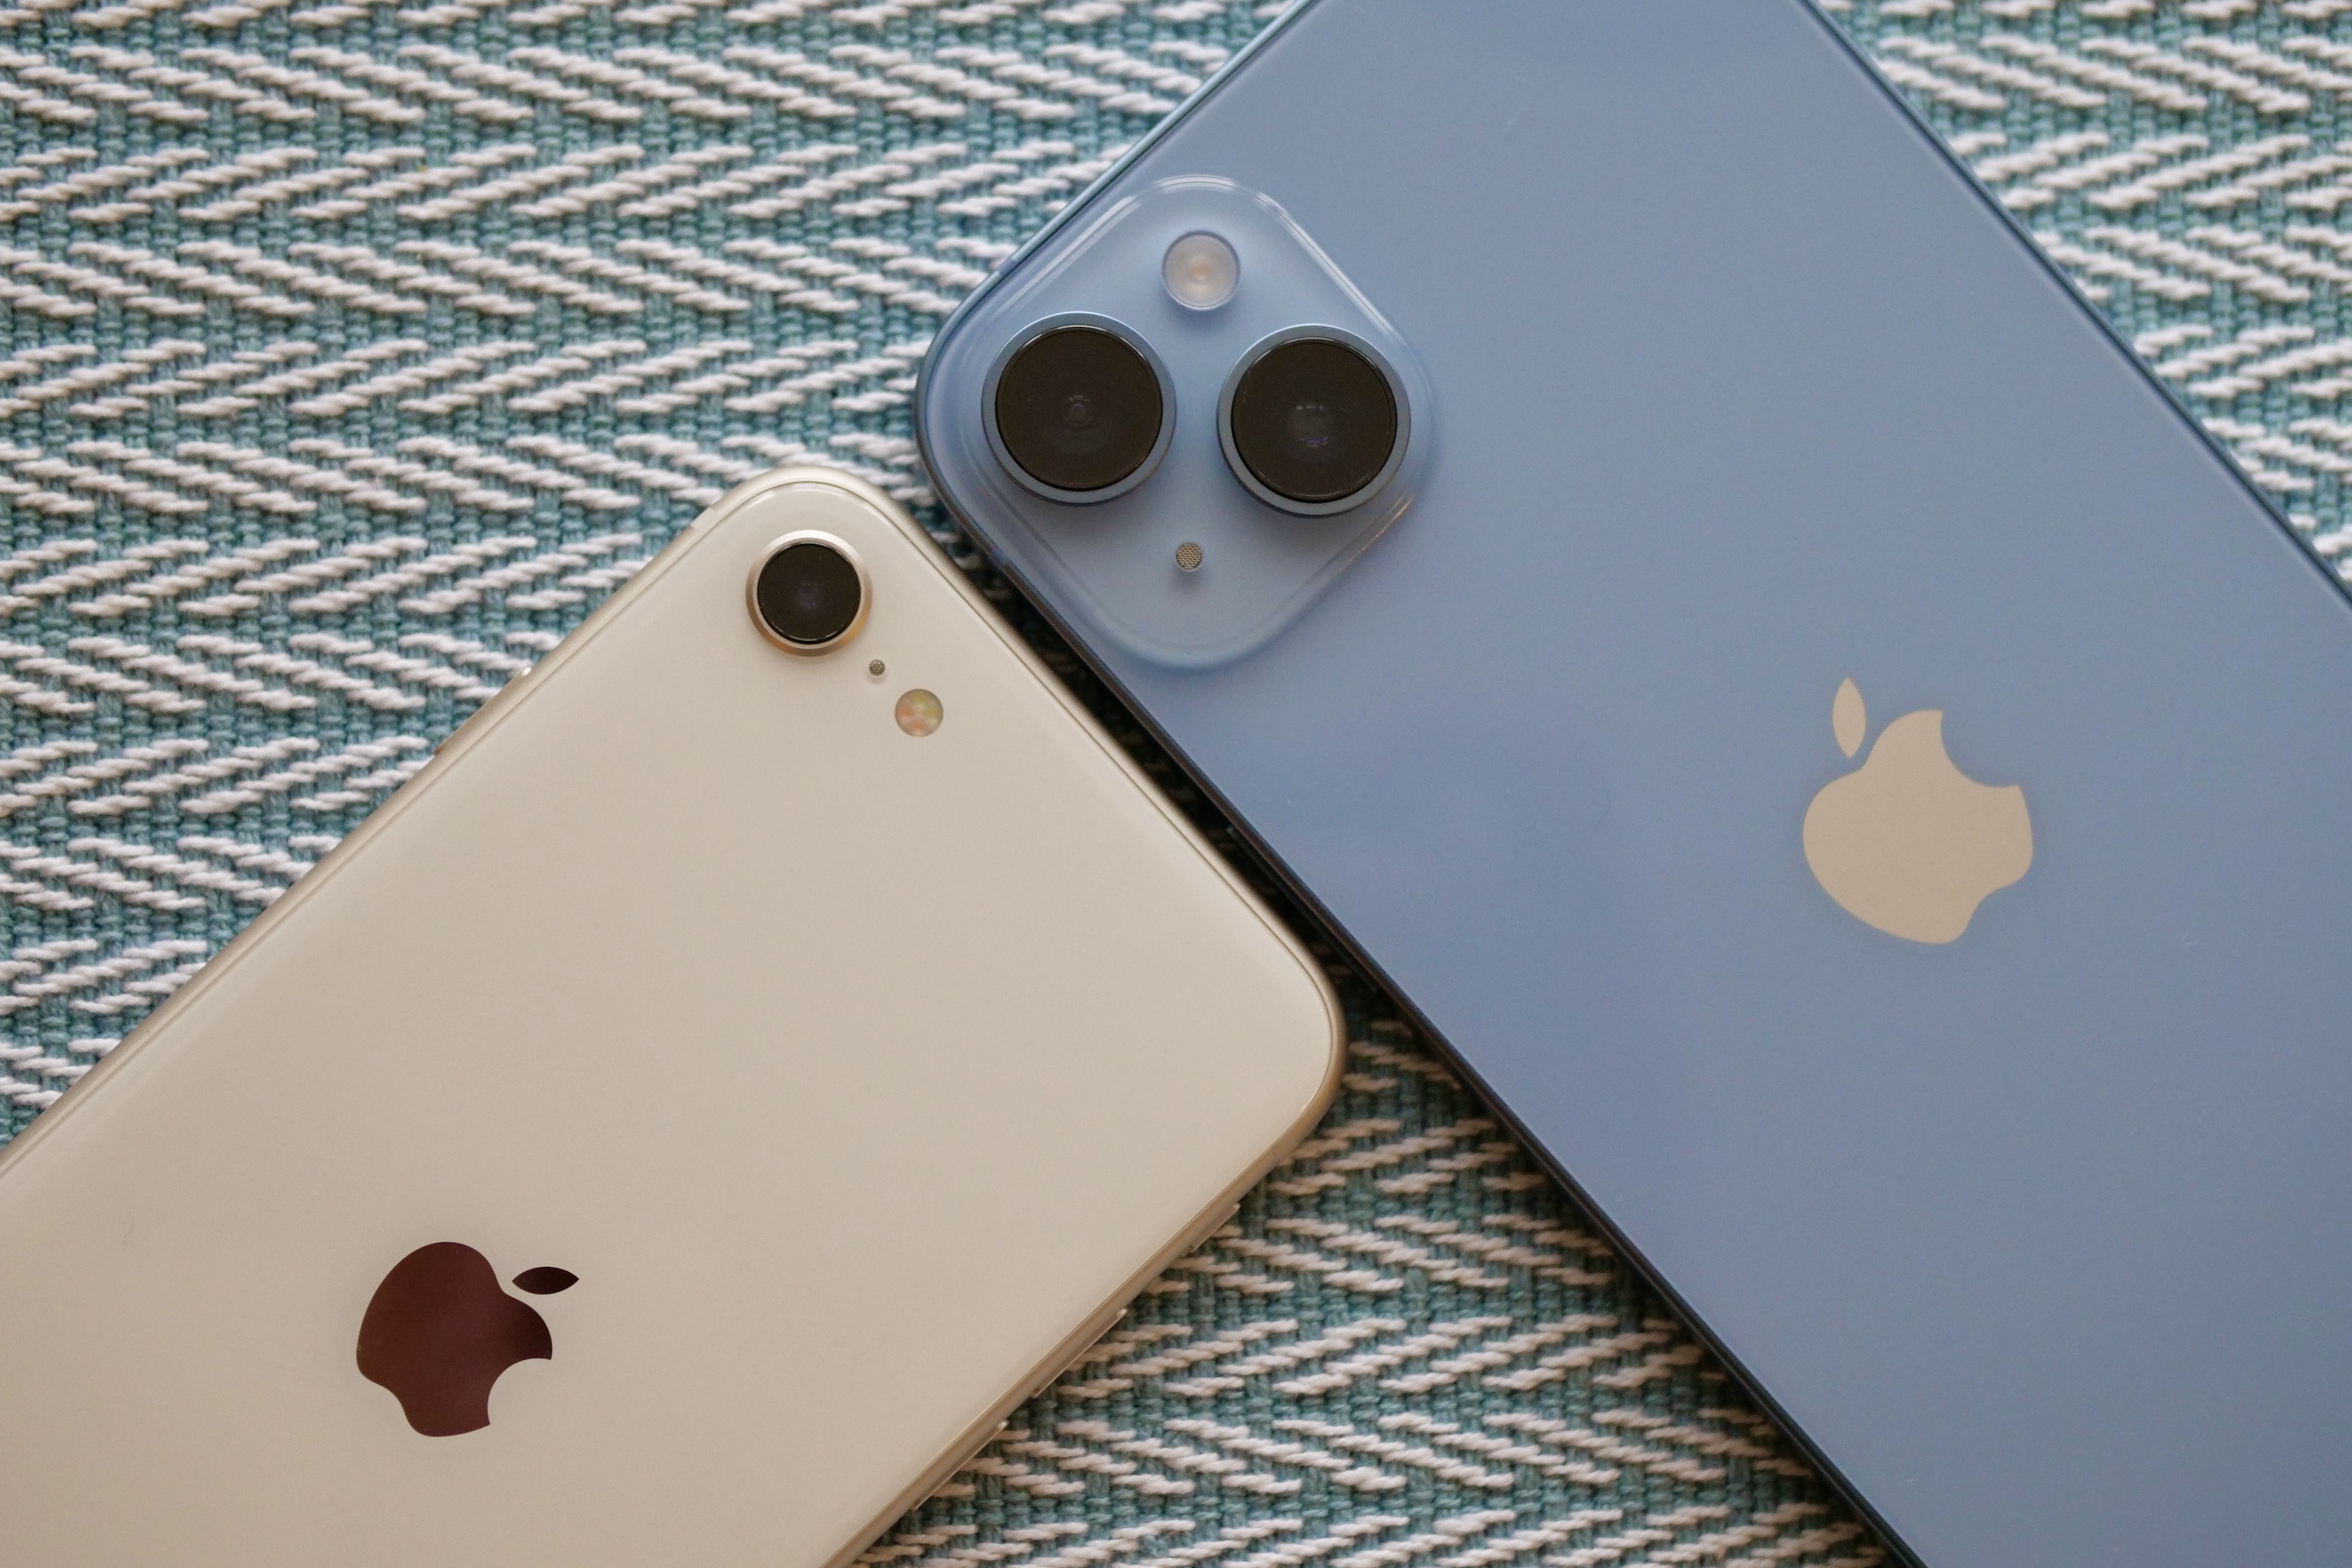 Apple might announce 3 different iPhone 7 models this year